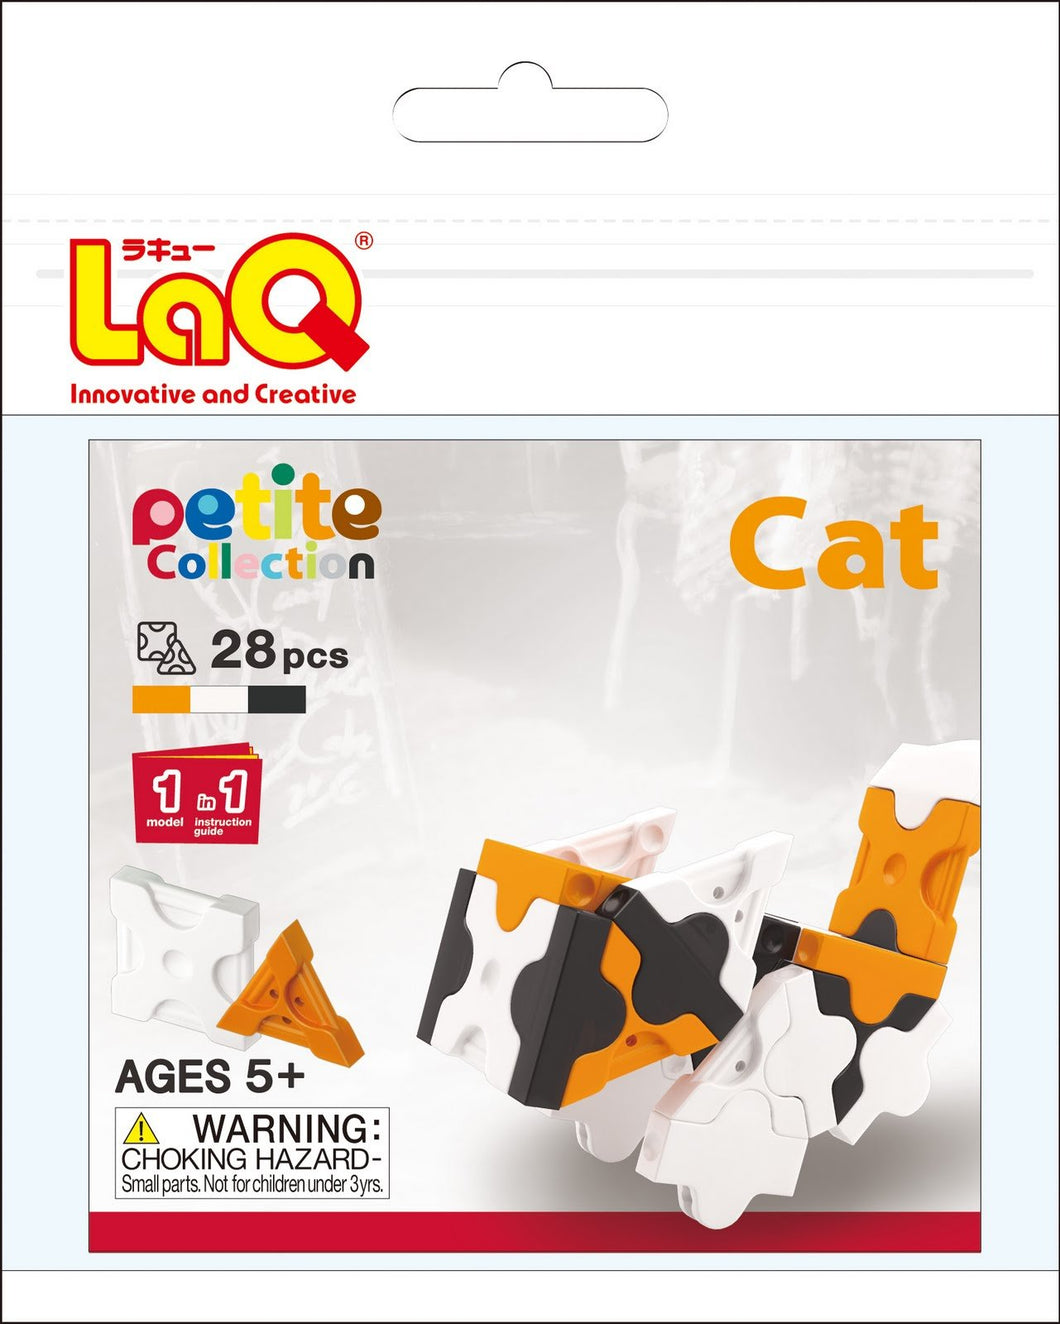 Cat set package featured in the LaQ petite set